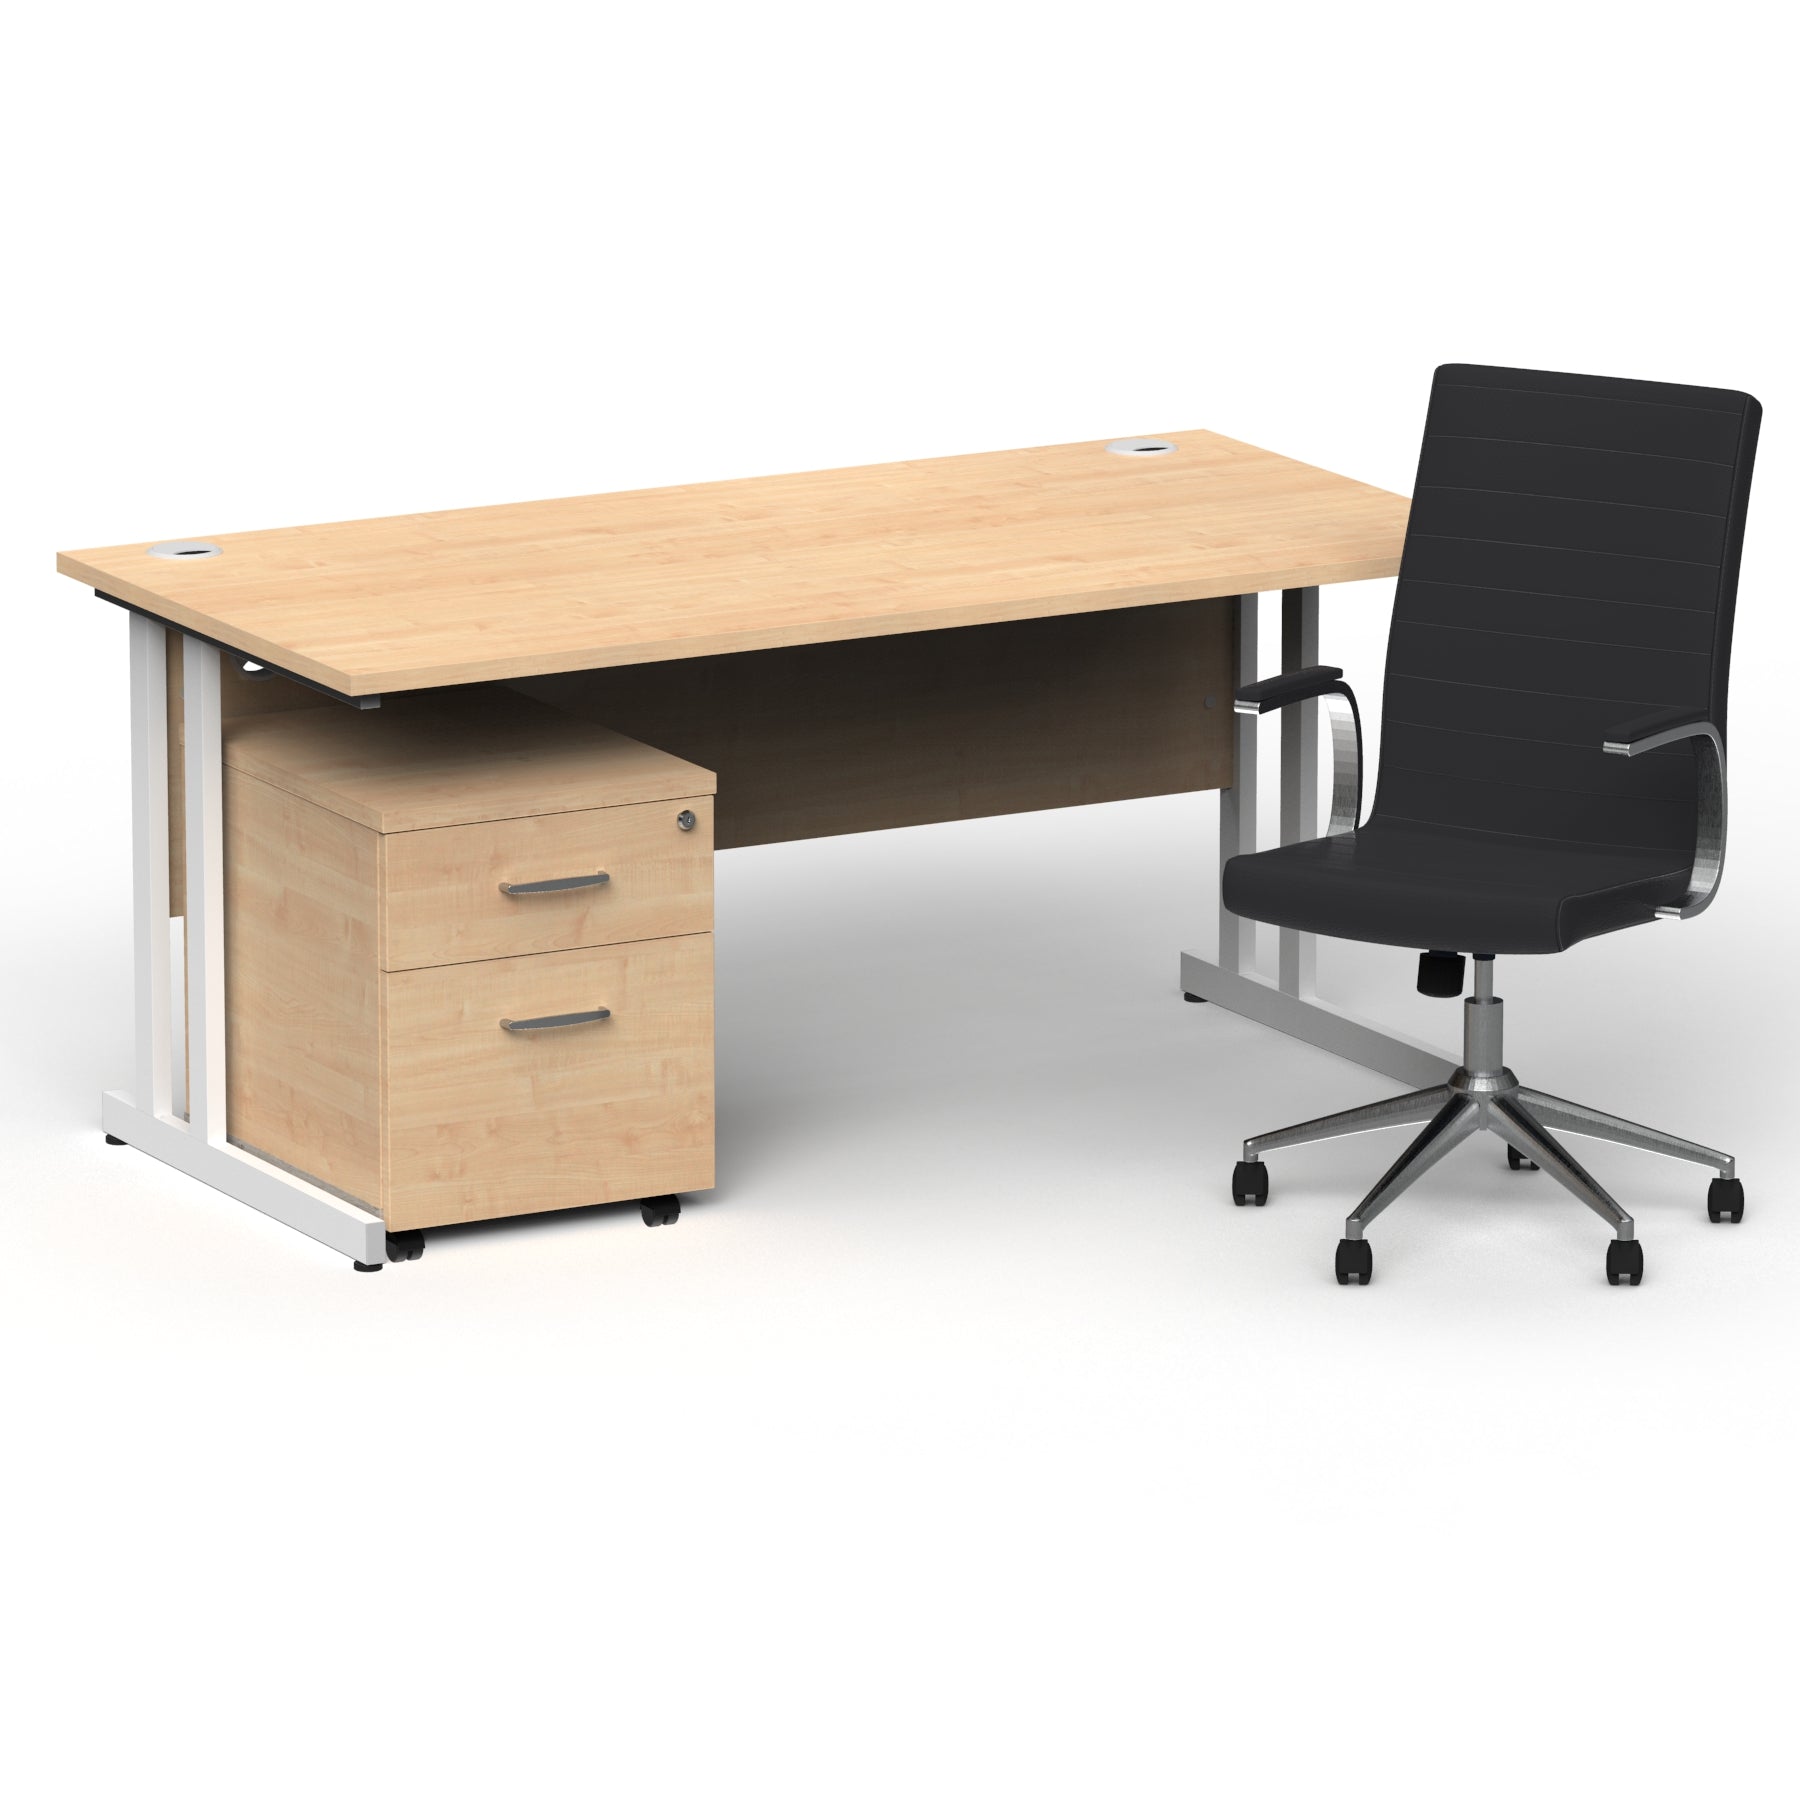 Impulse 1600mm Cantilever Straight Desk With Mobile Pedestal and Ezra Black Executive Chair